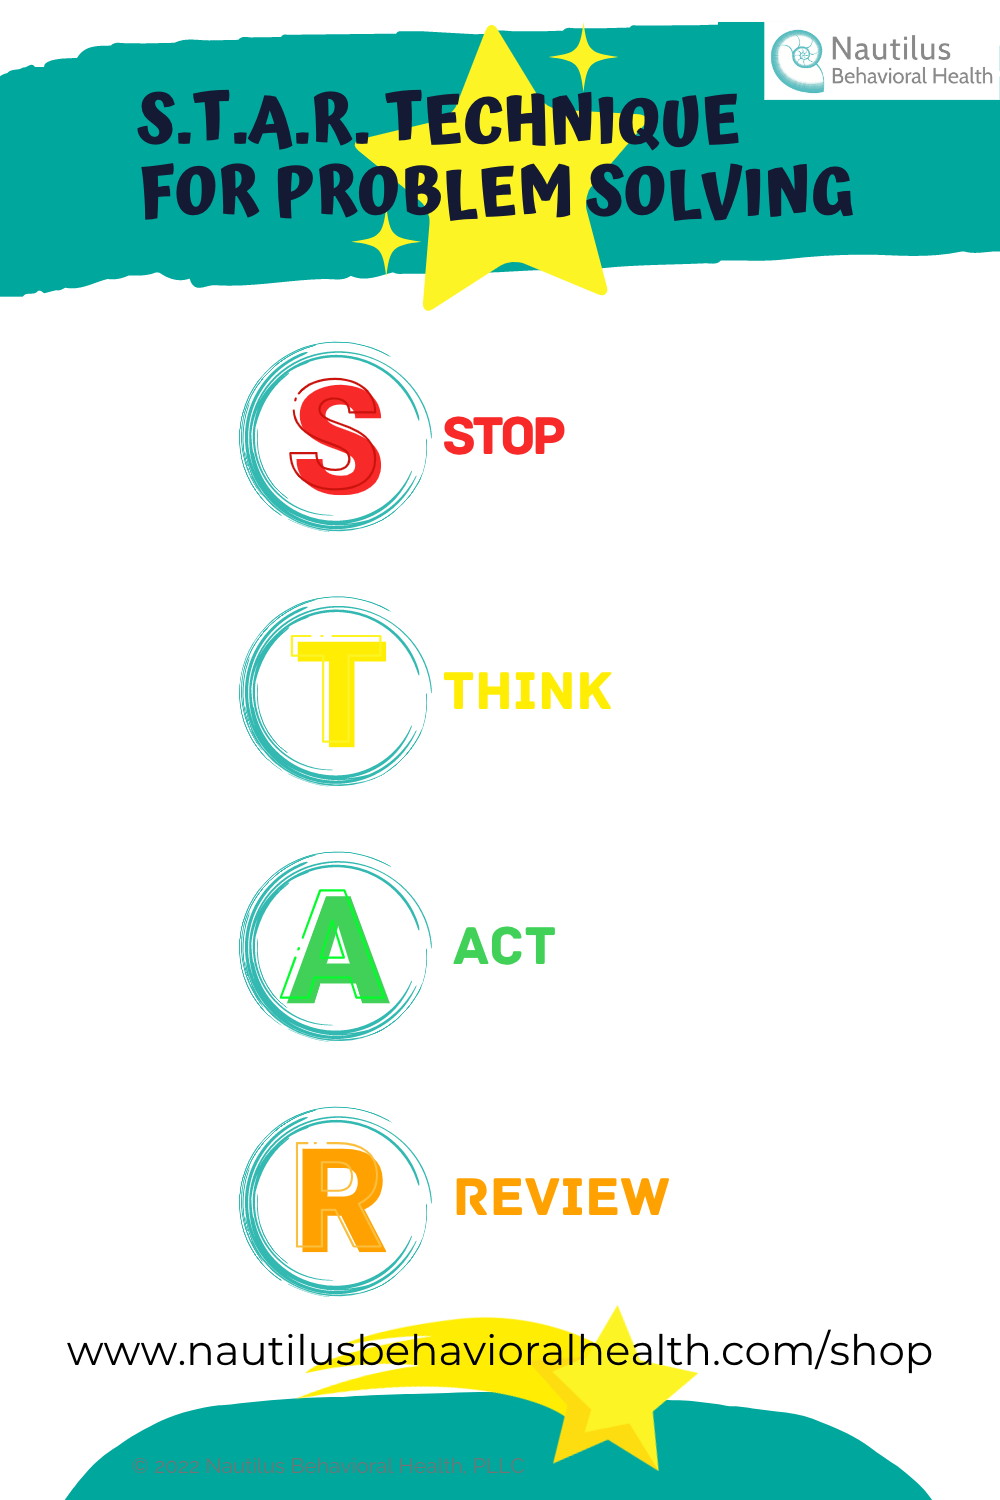 the acronym star in the problem solving life skill means